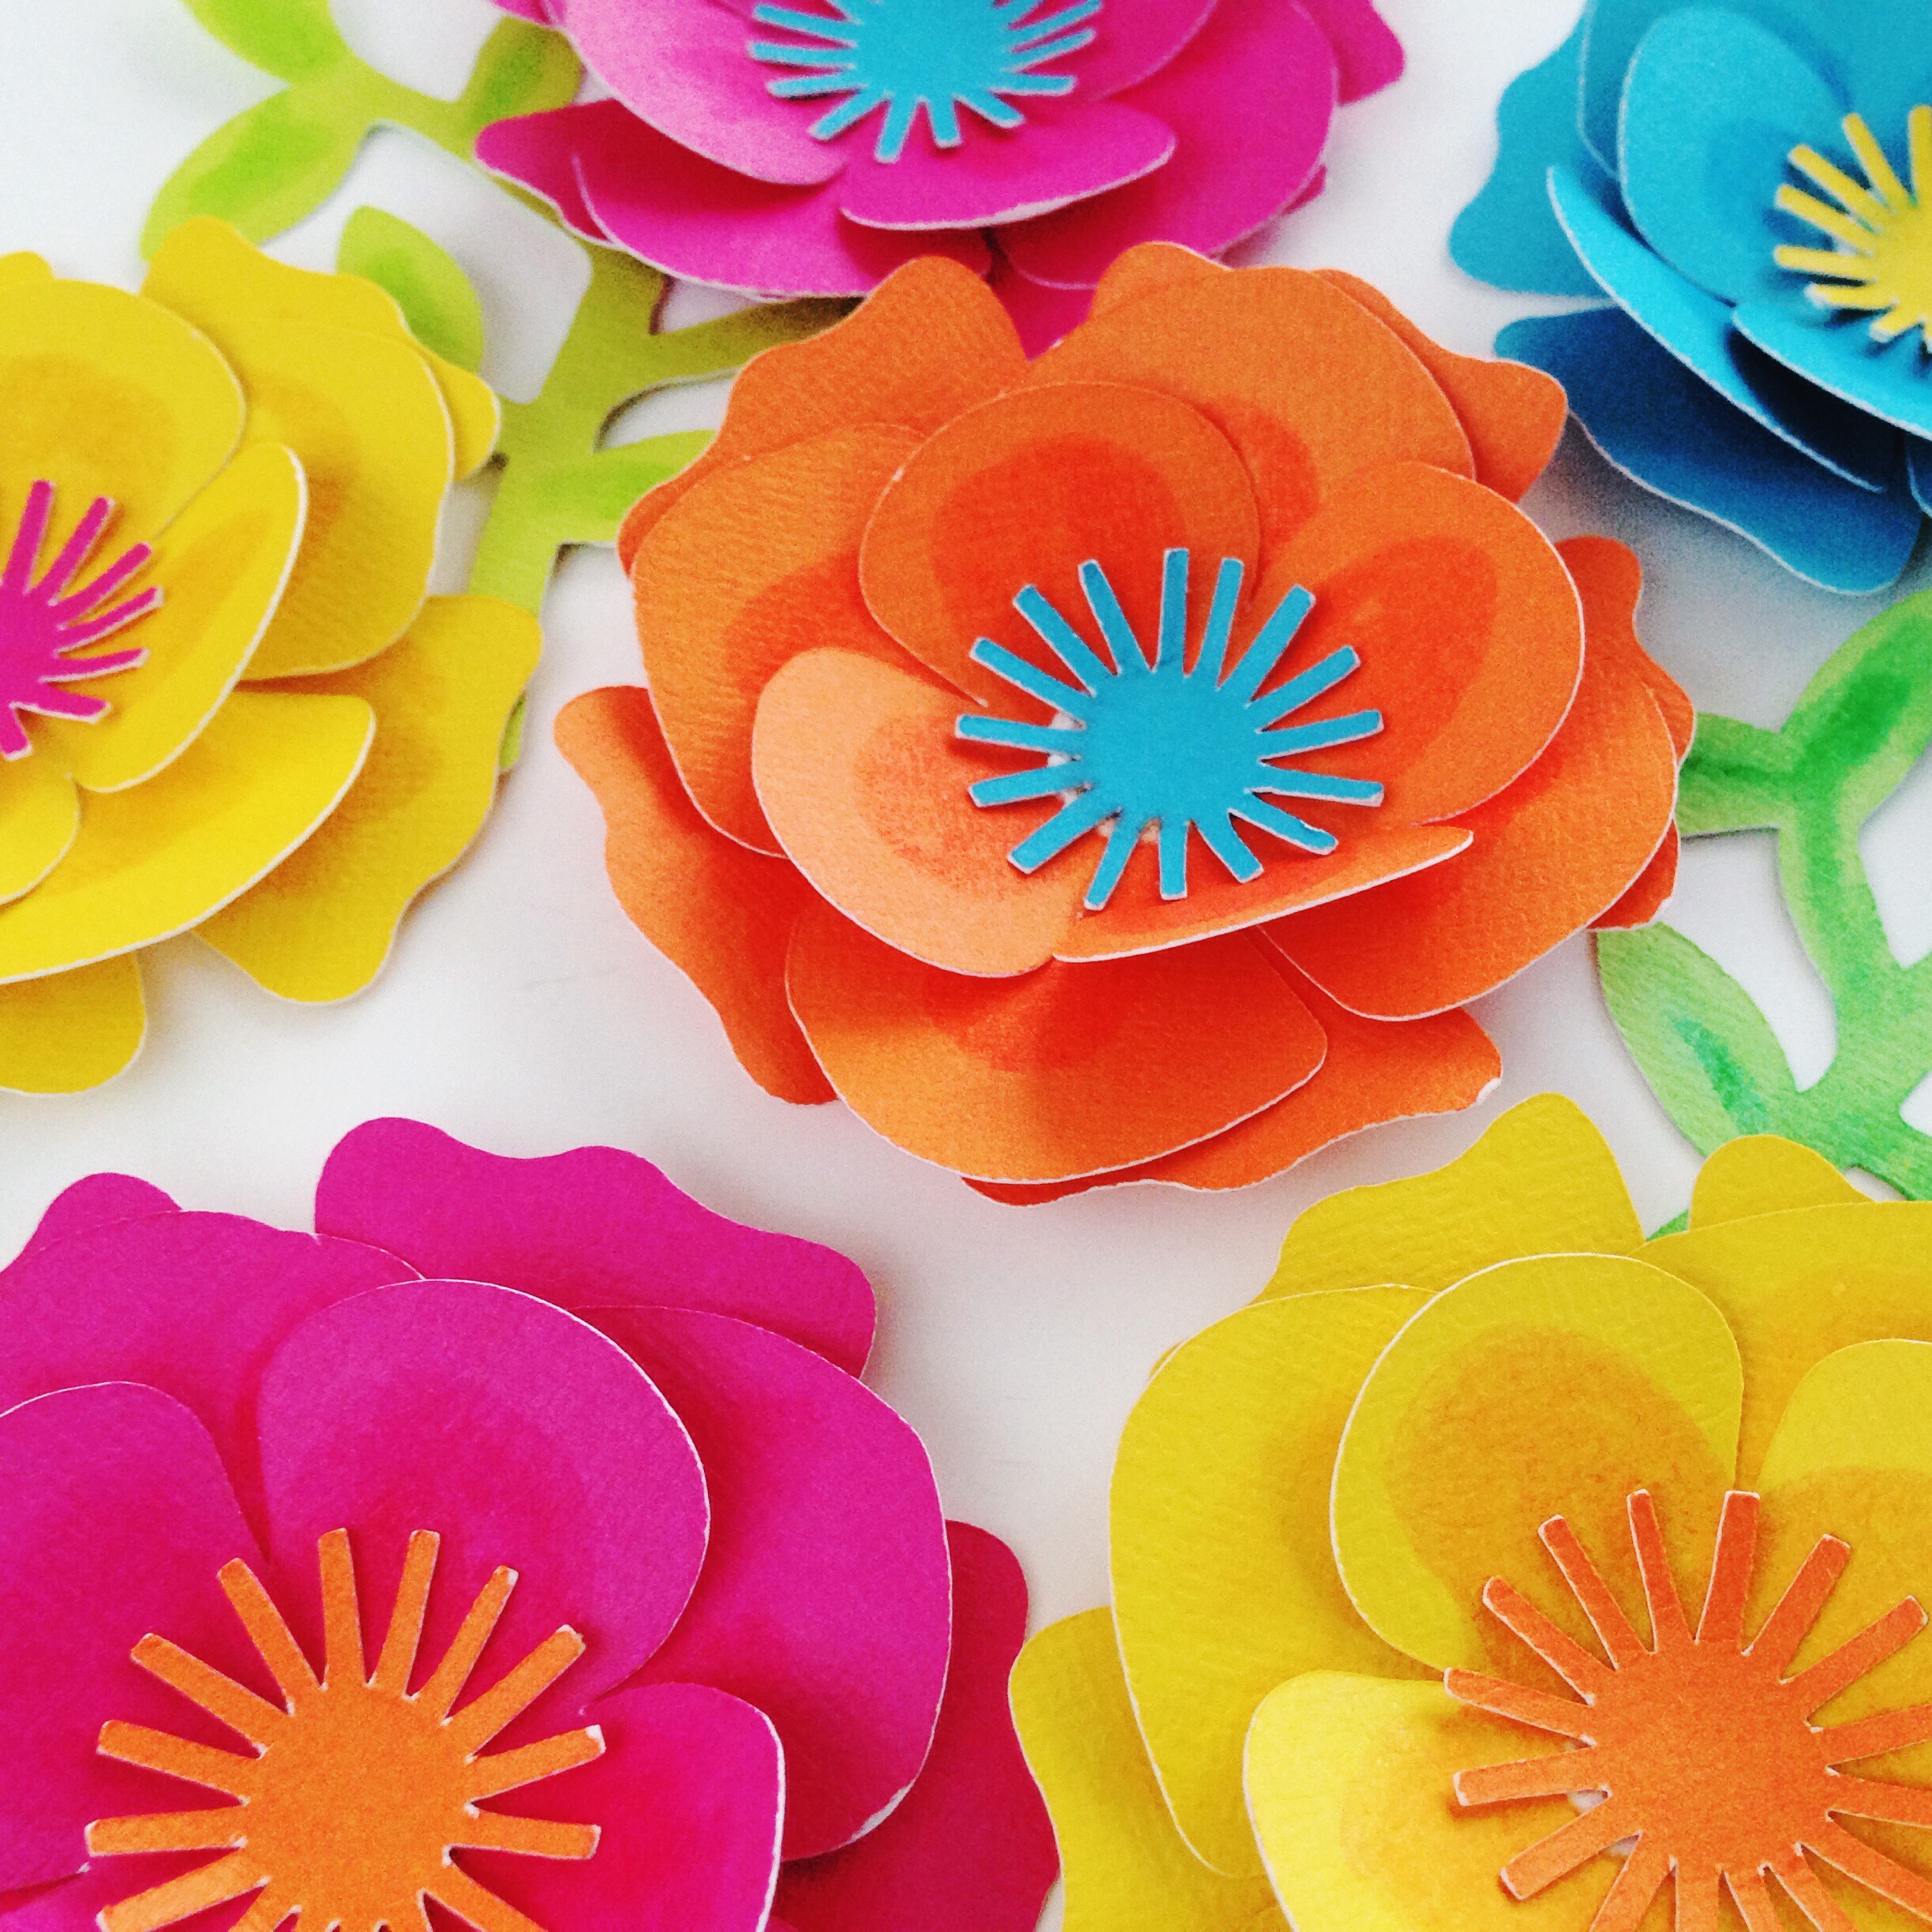 diy-paper-flowers-with-cricut-and-tombow-tombow-usa-blog